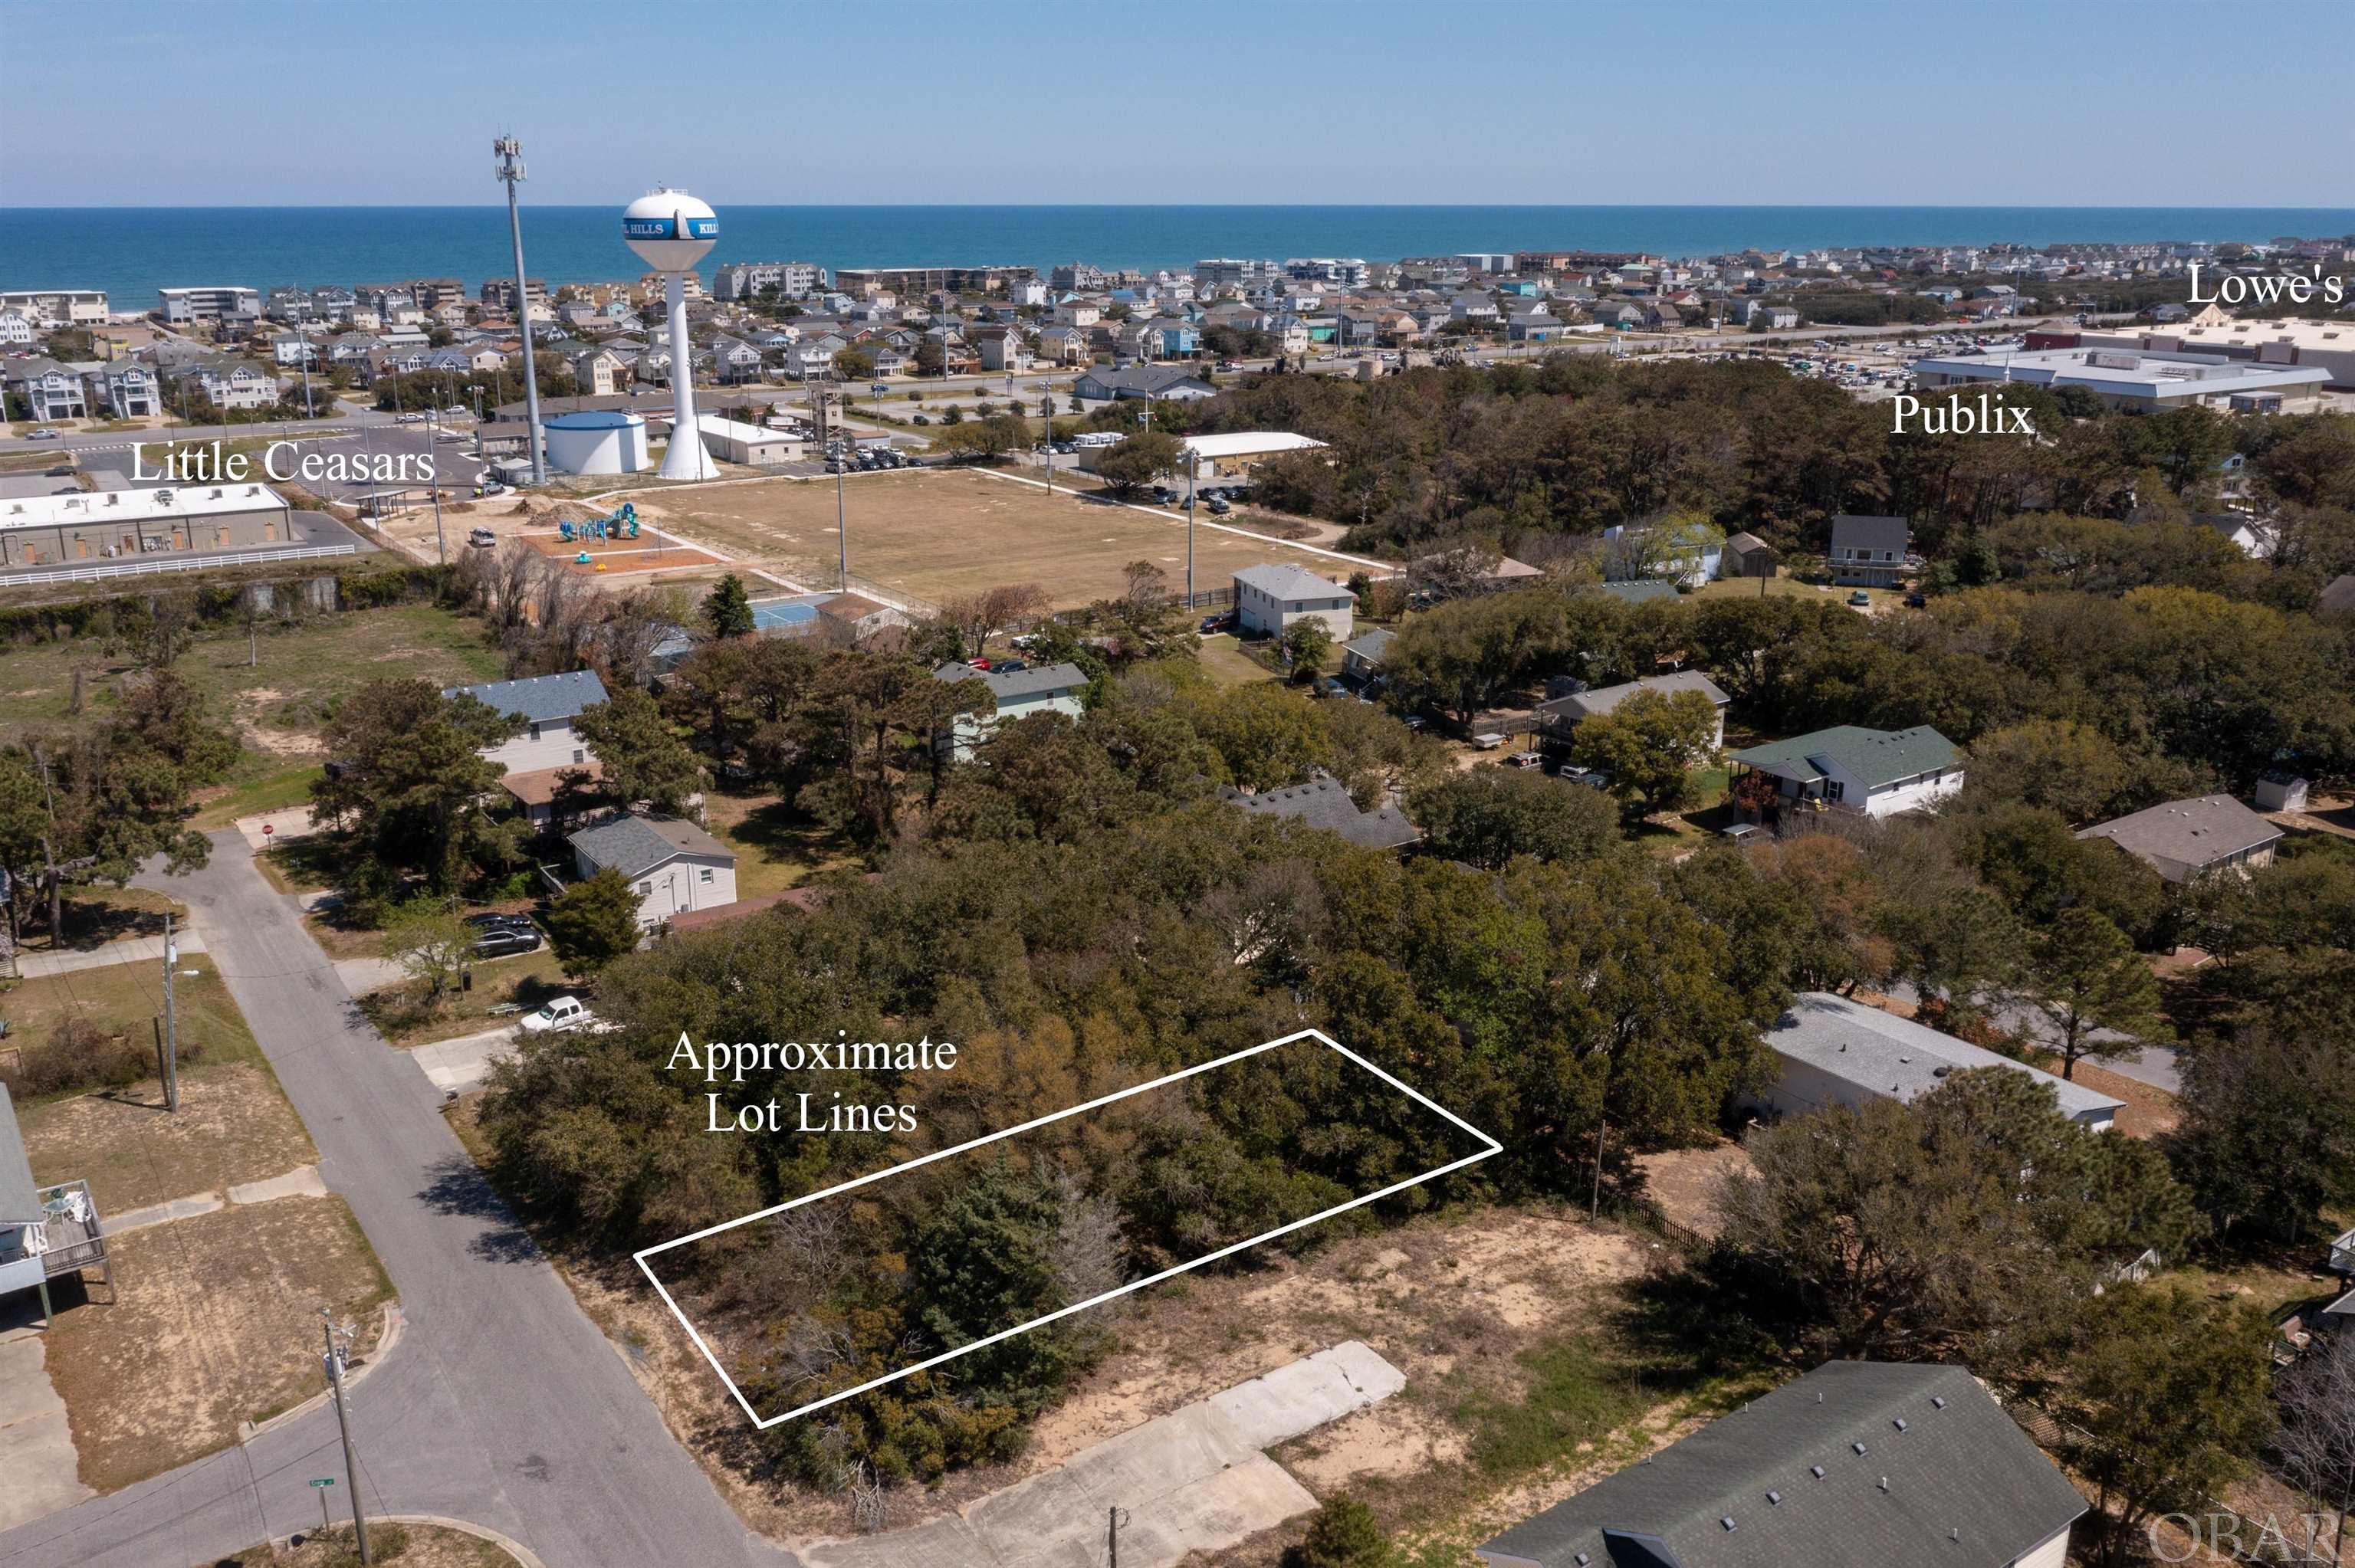 A Sweet Lot with high elevations located close to all of the amenities Kill Devil Hills is so well known for. This West Side lot offers opportunity with X Flood Zone and No Fill Required. With multiple Beach Access options directly across the Stop Light and the Sound Access at the end of Third that blends into the Bay Drive Multi Use path for miles of enjoyment along the sound. A winning combination. The Sound access for launching your boat is at Dock Street just quick bike or car ride away. Located in a private setting but also close to Publix, Food Lion, Lowes, and the upcoming Target, this is a no brainer. Call me today to discuss your options. Lot directly next door is also available for sale. Property taxes are estimated using 2021 tax rate and the asking price. Actual taxes will be determined upon separation of lots by the county.